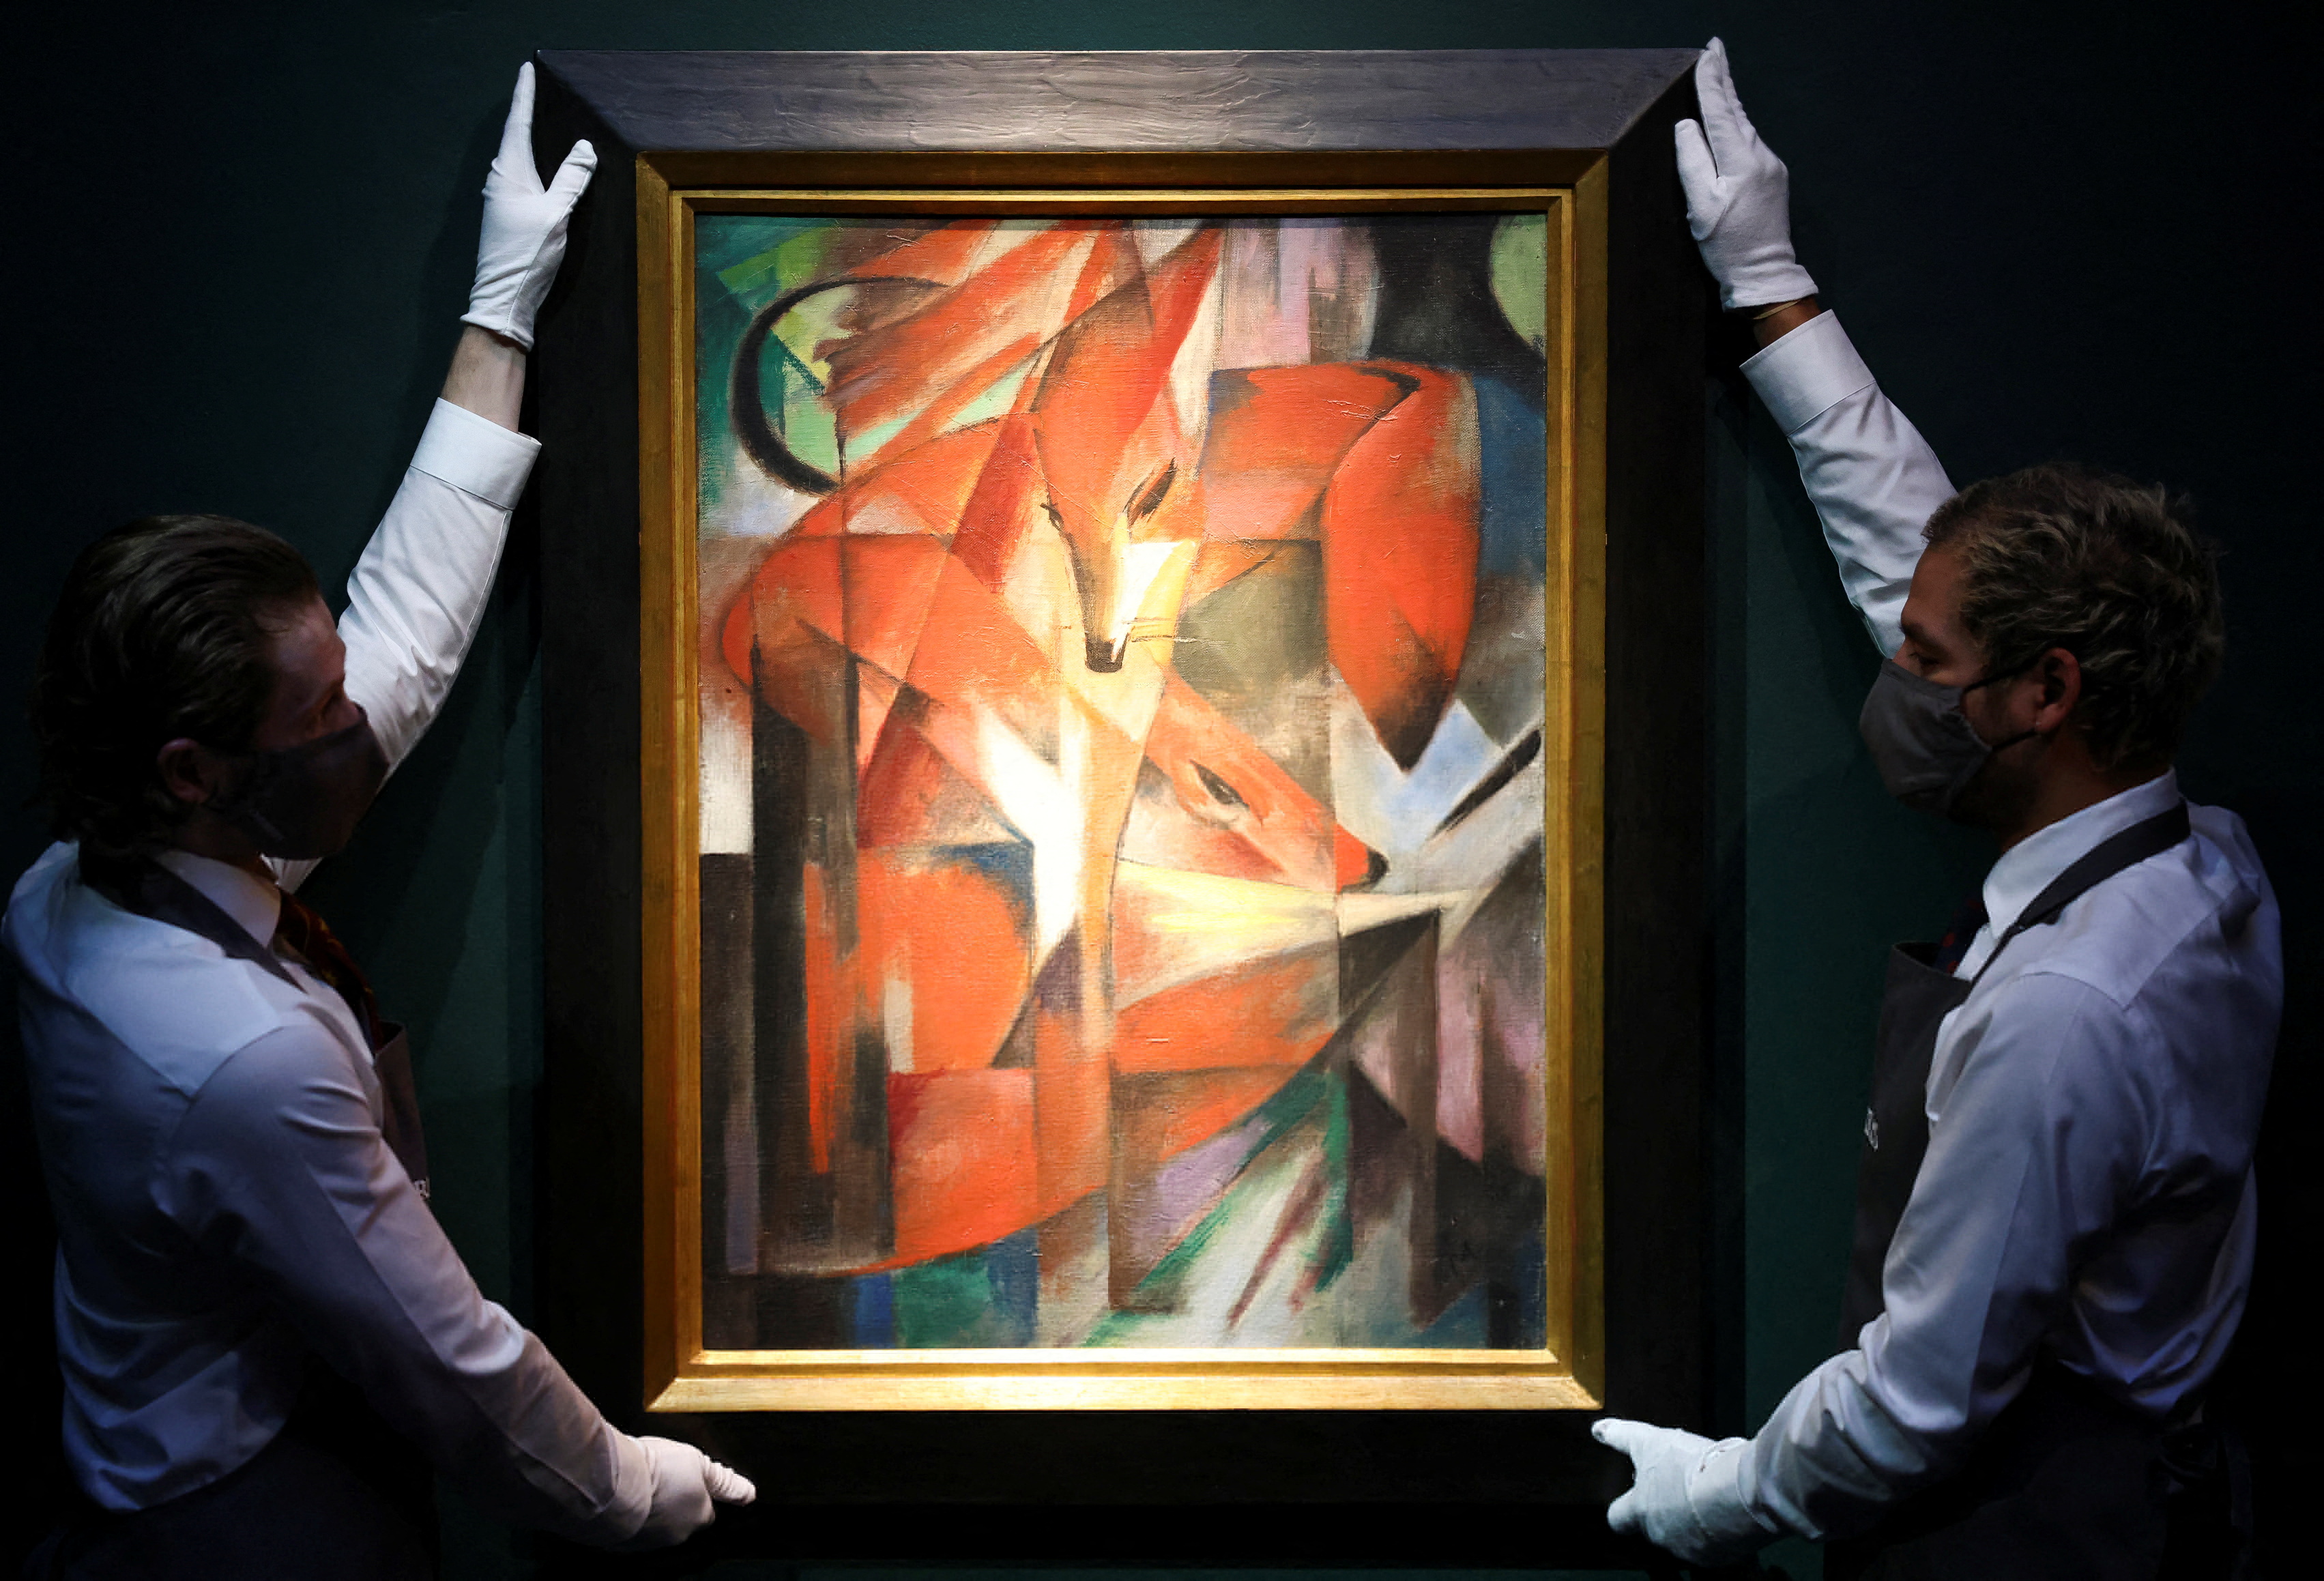 'The Foxes' (1913) by painter Franz Marc at Christie's Auction House in London